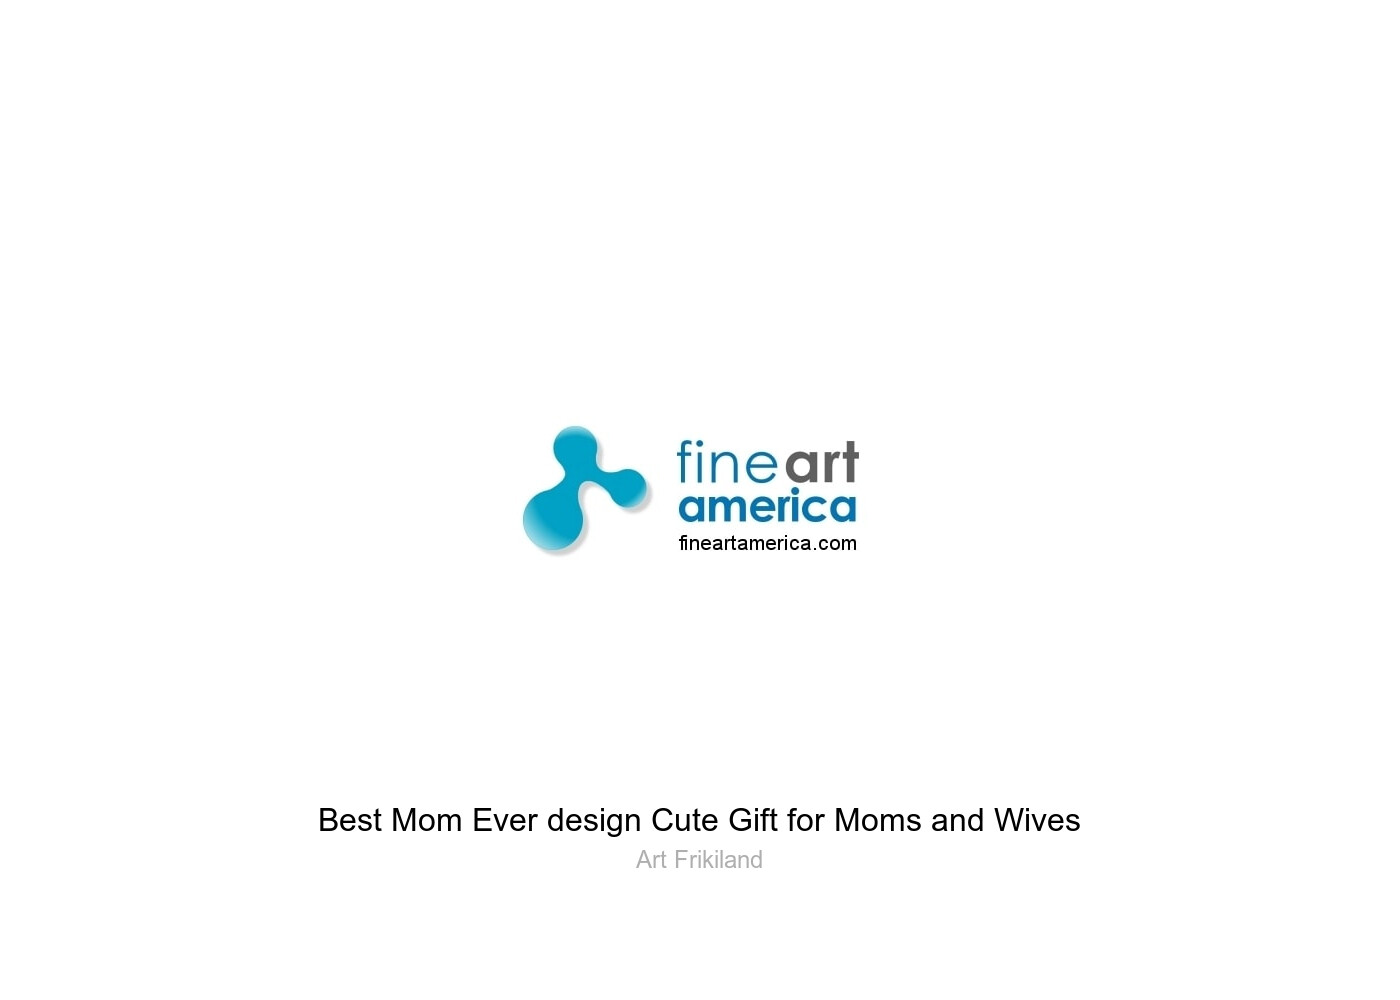 Best Mom Ever design Cute Gift for Moms and Wives Greeting Card